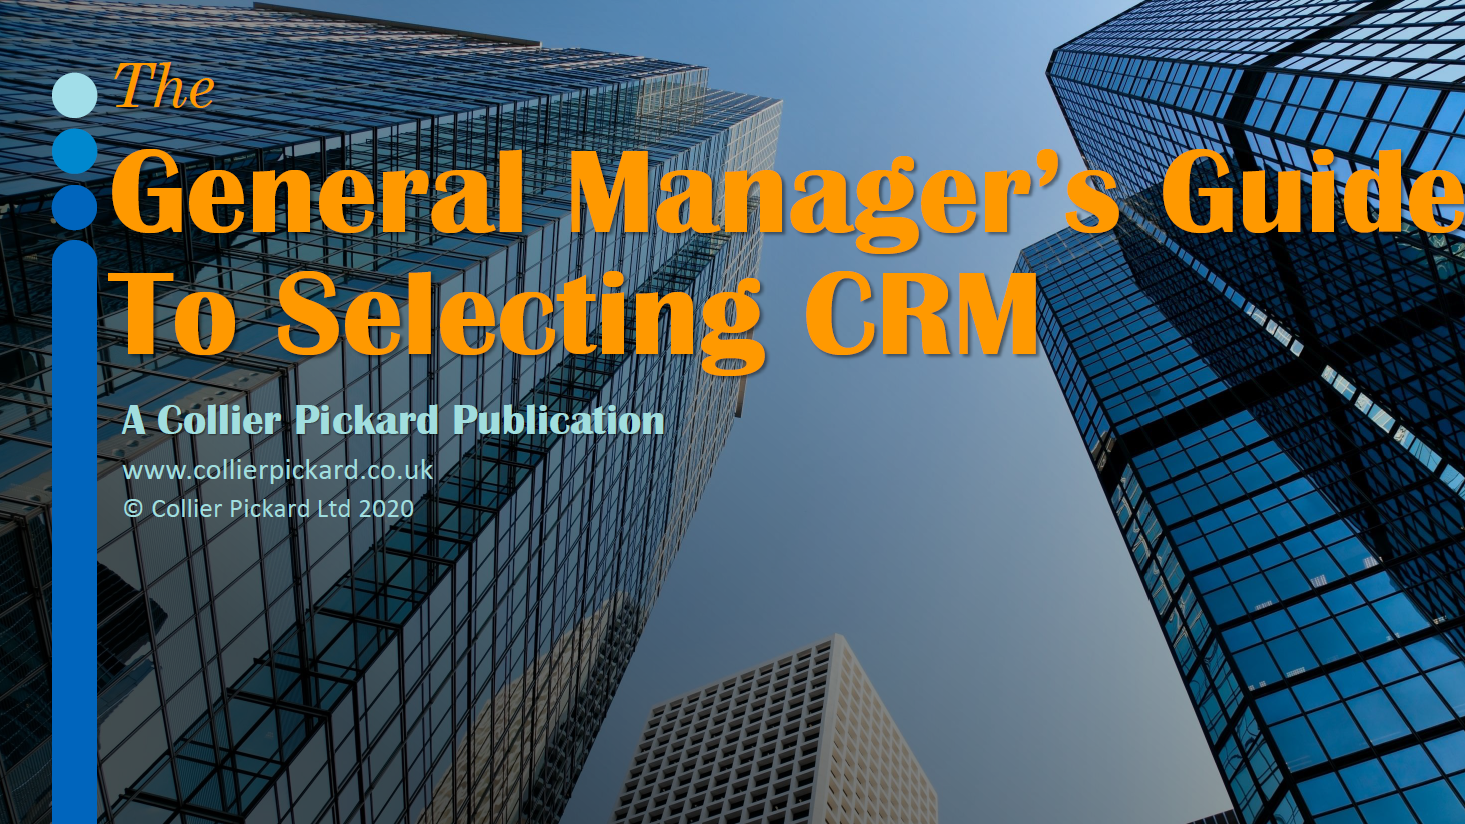 The General Manager's Guide to Selecting CRM